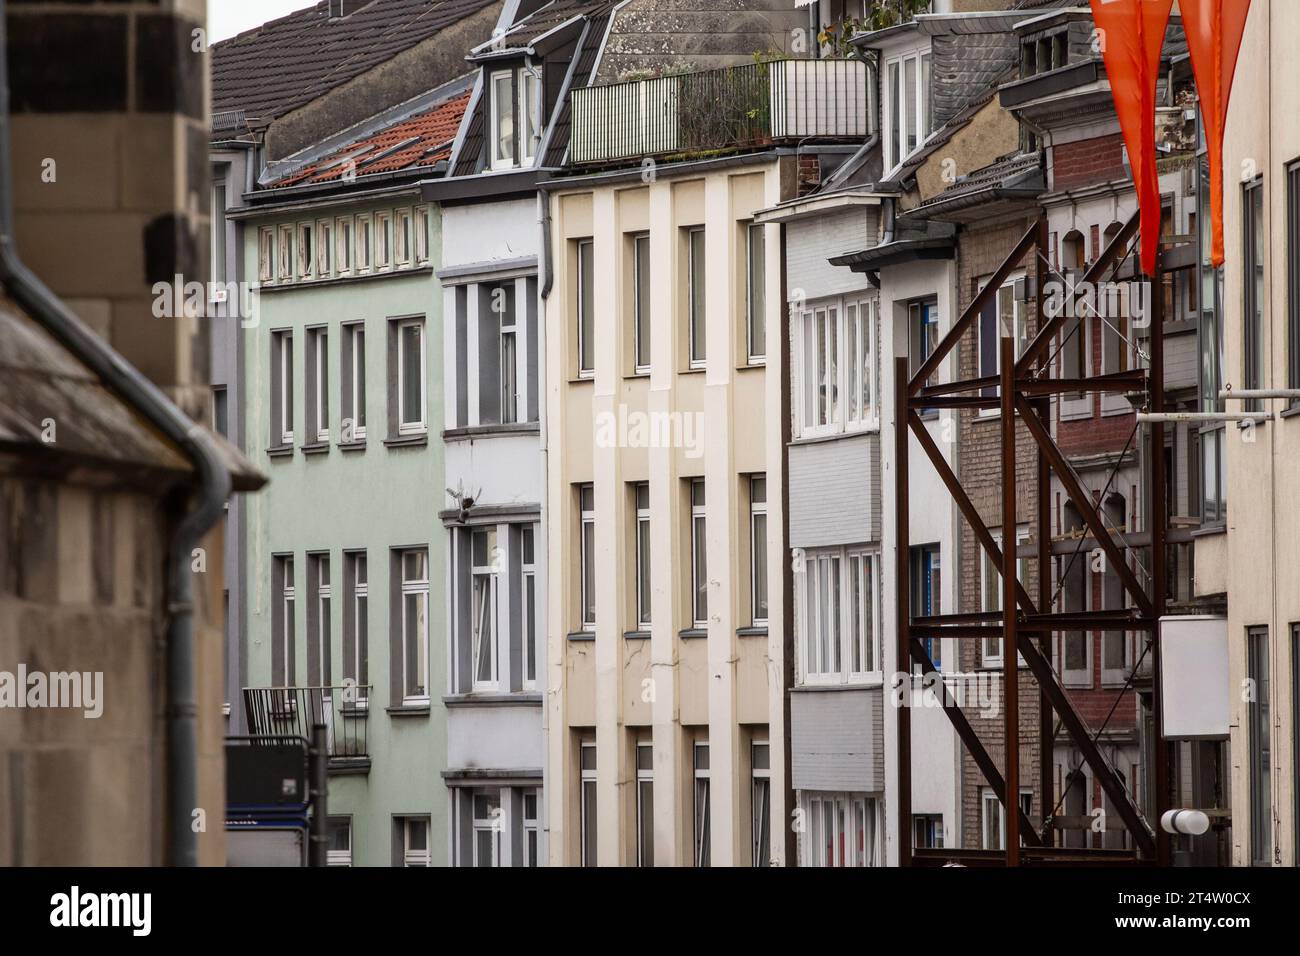 Picture of facades of residential building, with a vintage german architecture, in the city center of Aachen, Germany. Stock Photo